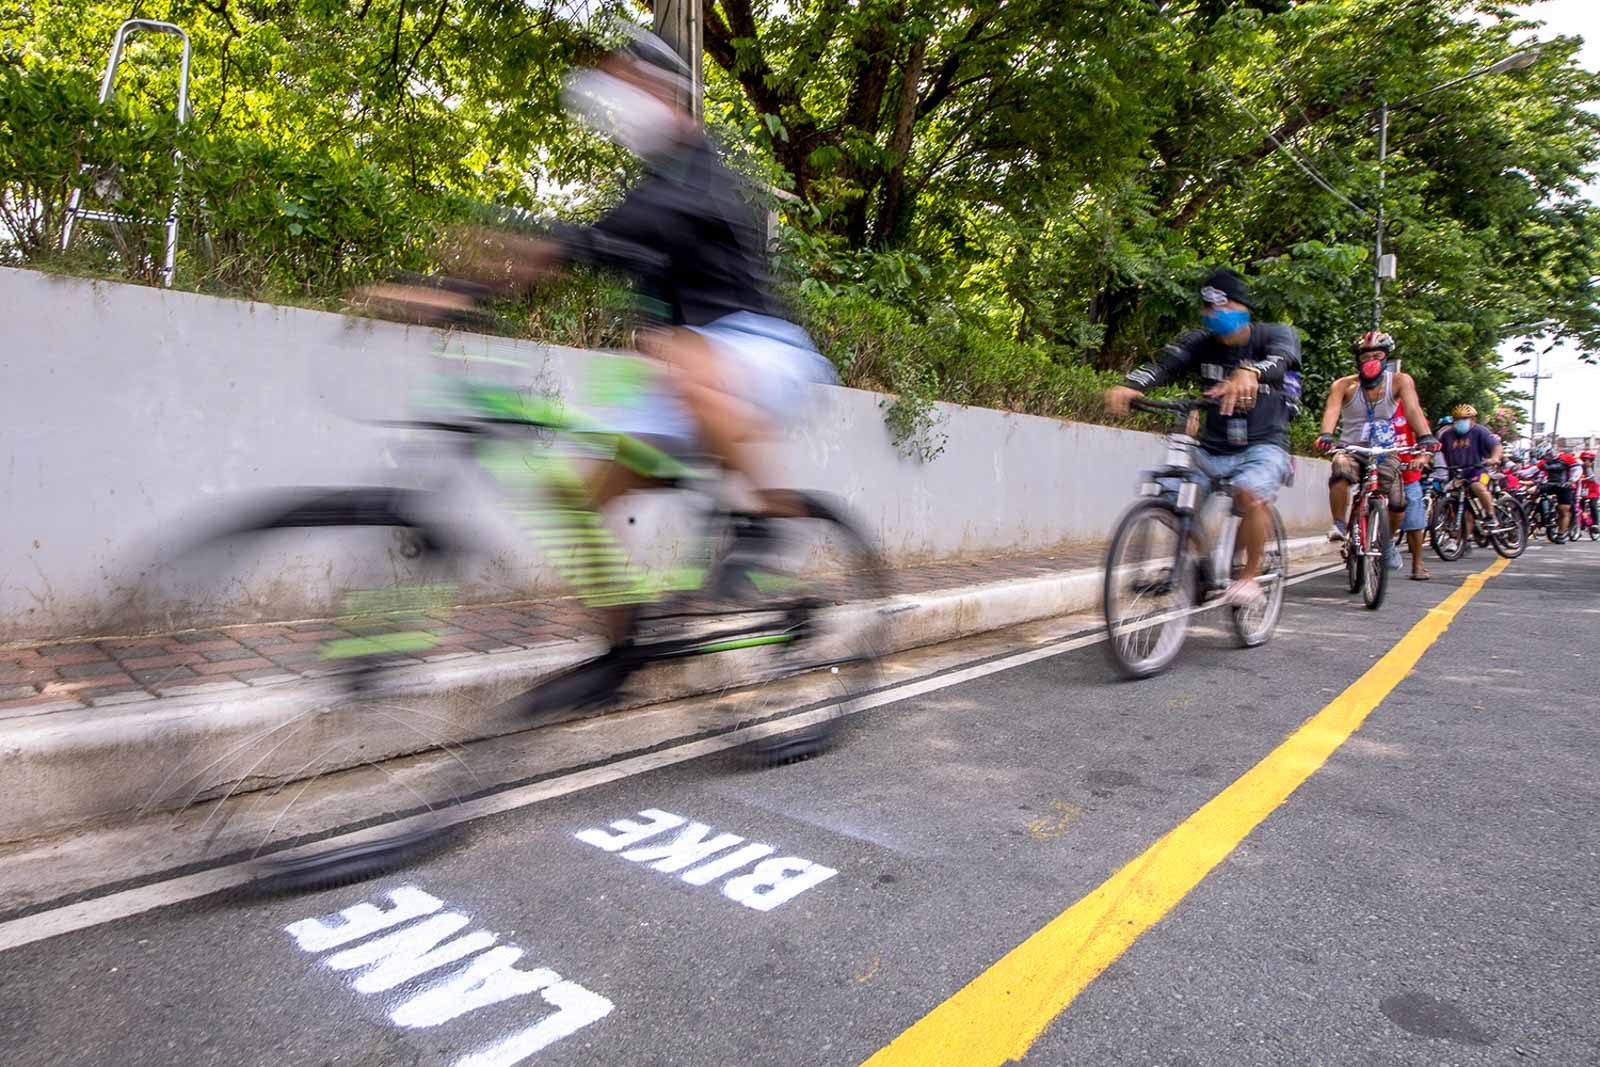 DILG to require bike lanes, warns of charges if not followed